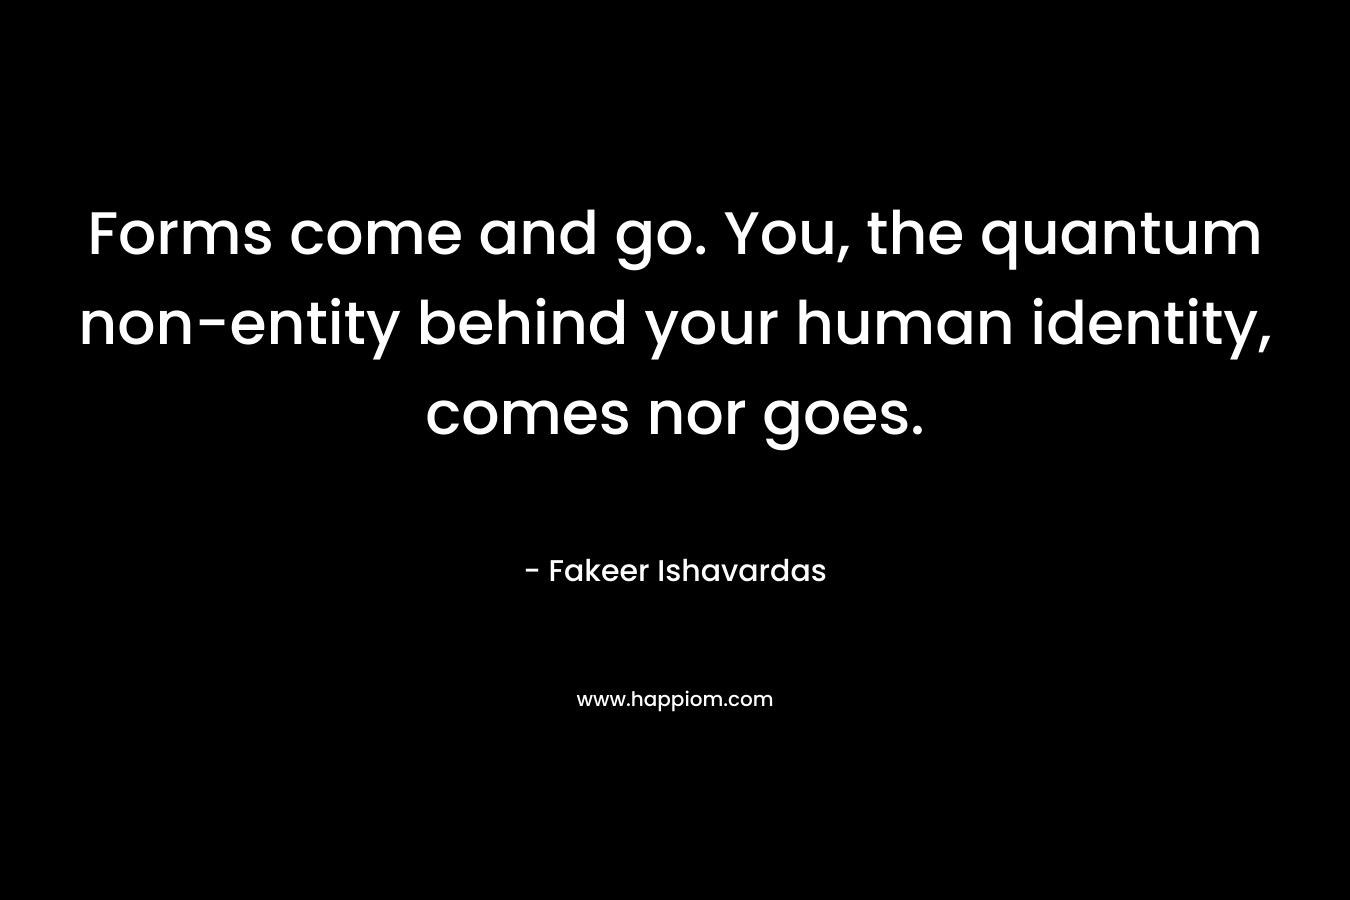 Forms come and go. You, the quantum non-entity behind your human identity, comes nor goes. – Fakeer Ishavardas